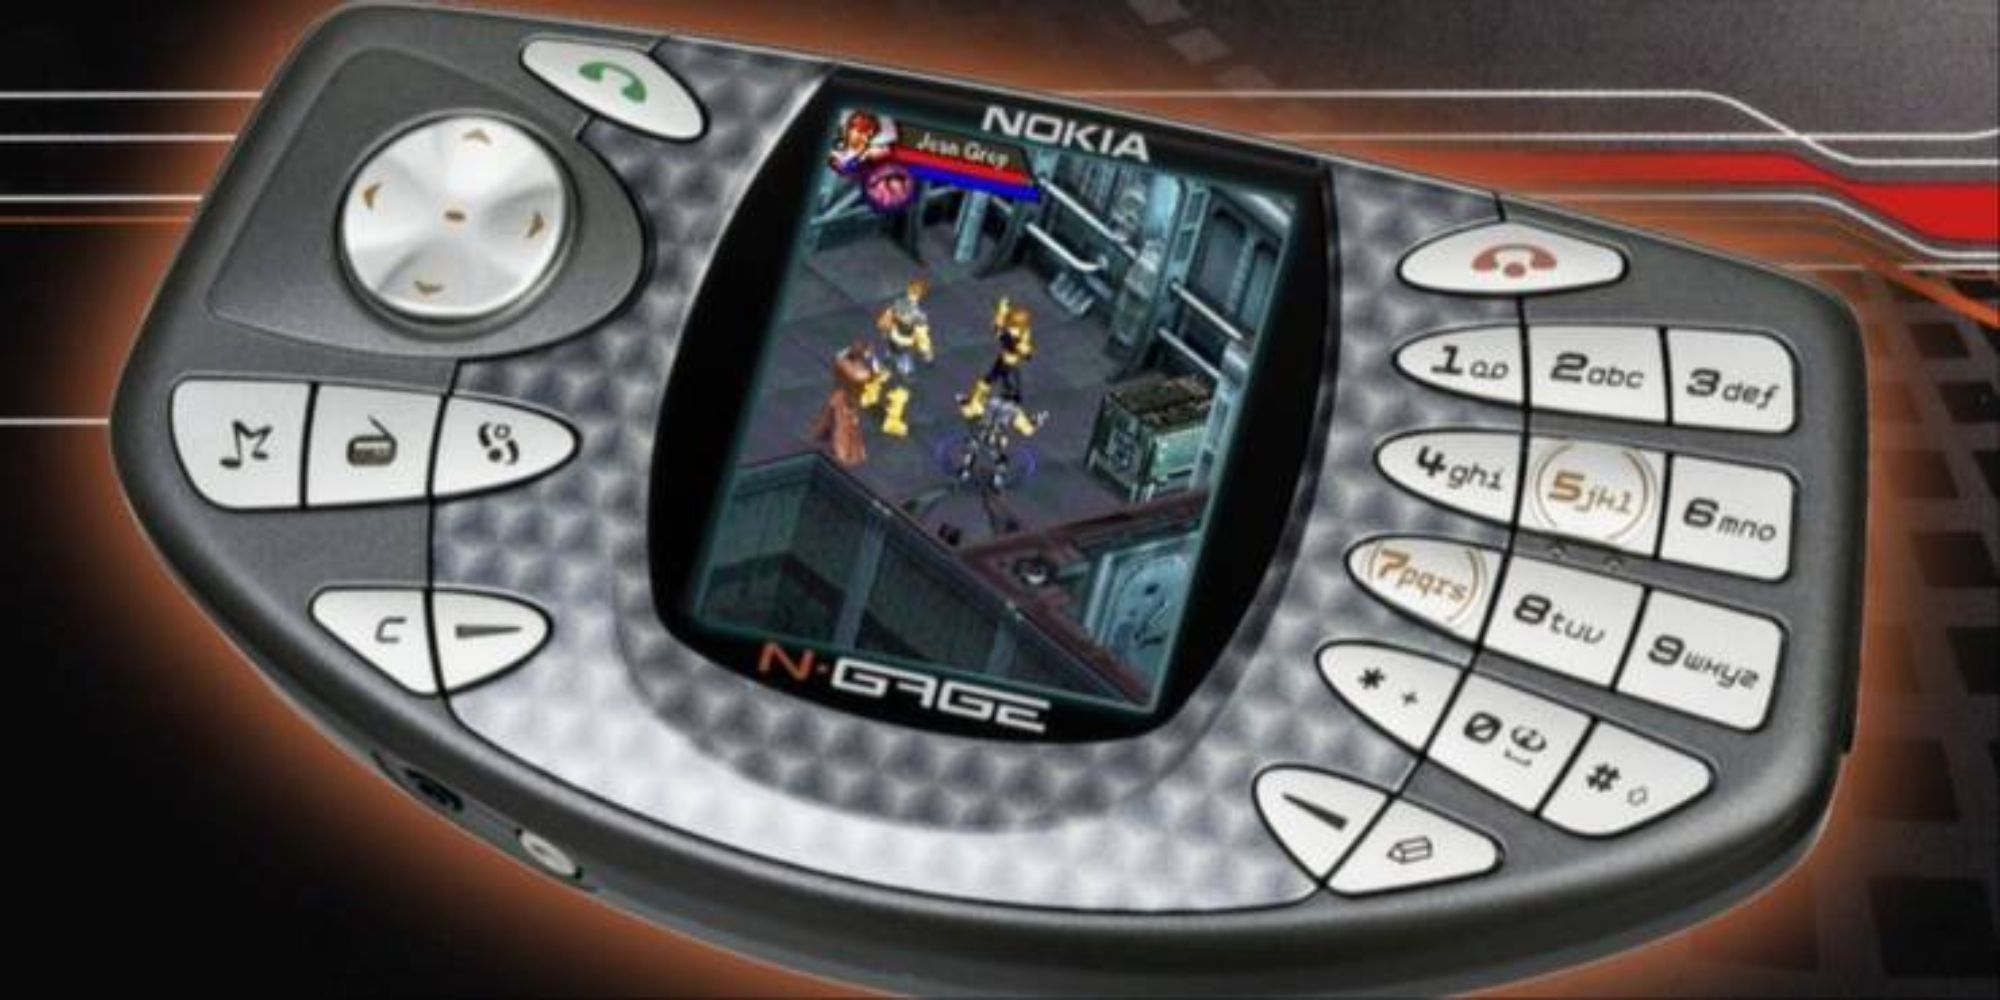 N-Gage console with game playing on screen